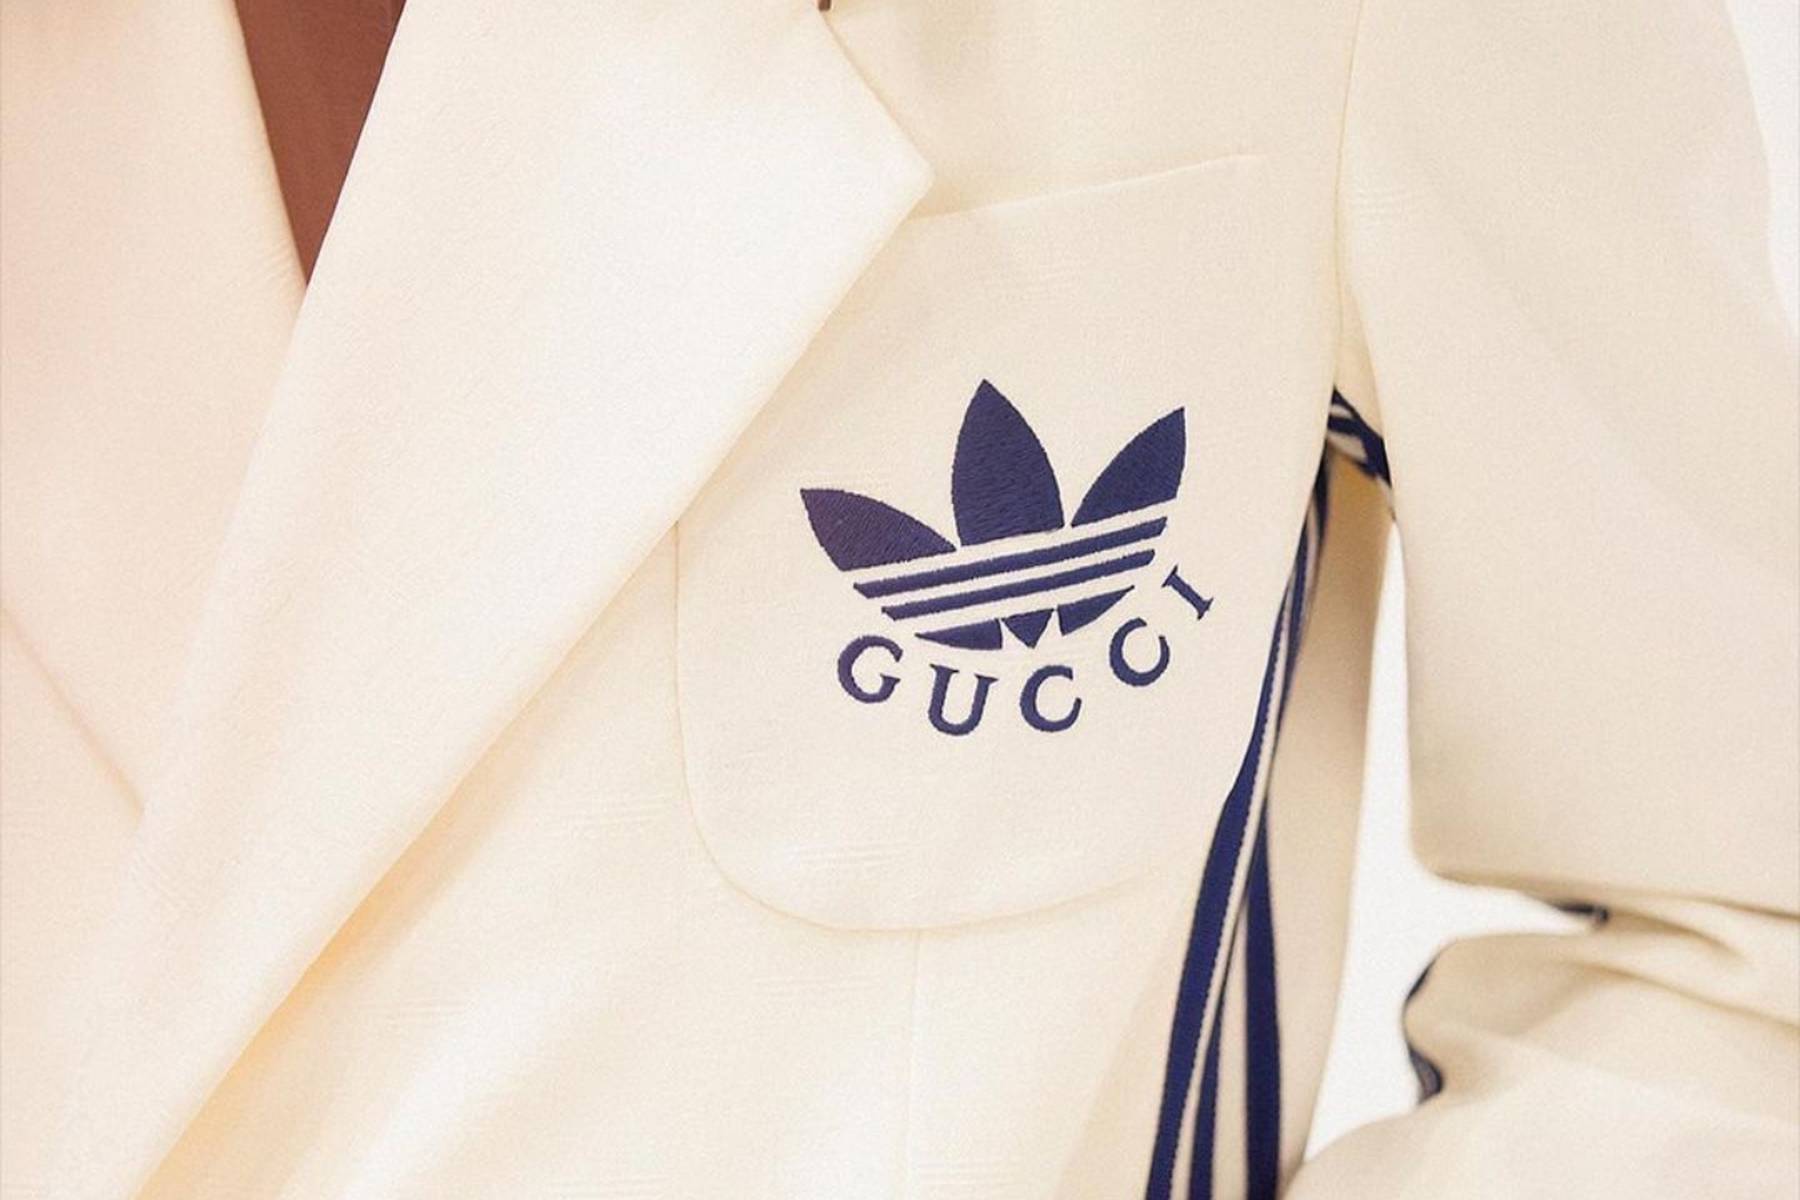 A first look at the Gucci Adidas collab.